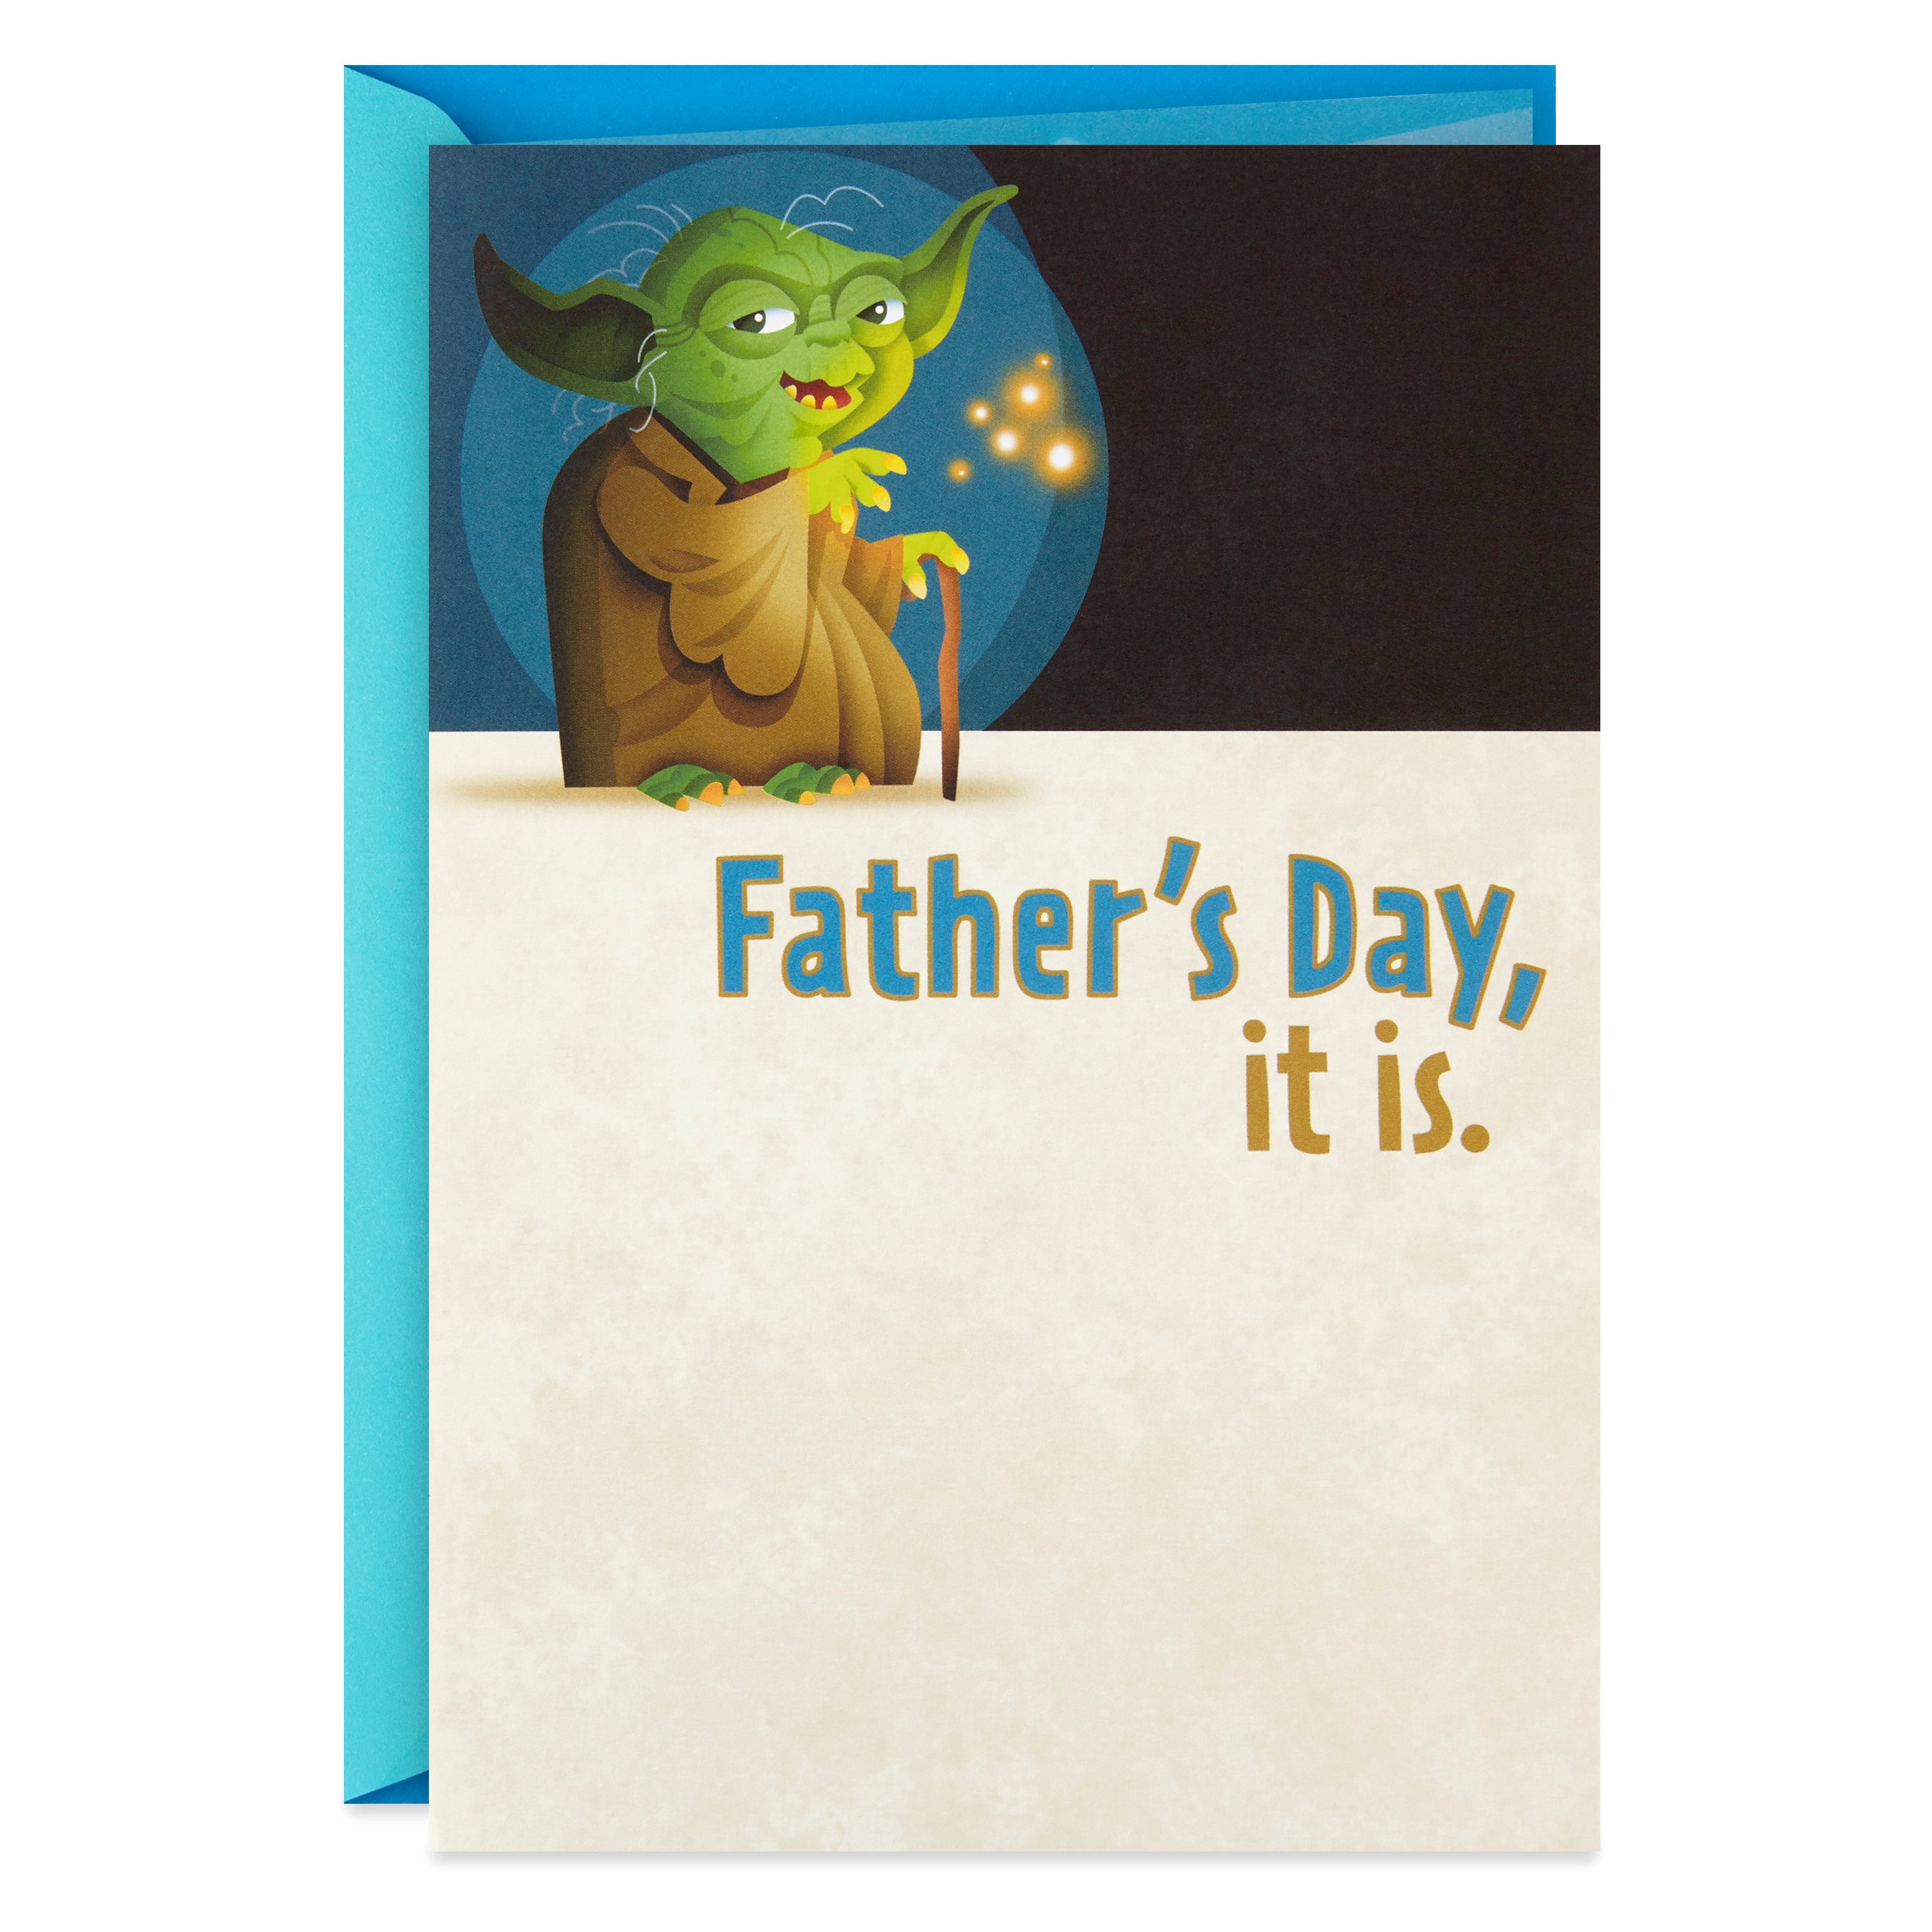 Star Wars Father's Day Card (Yoda, Celebrate You, We Must)